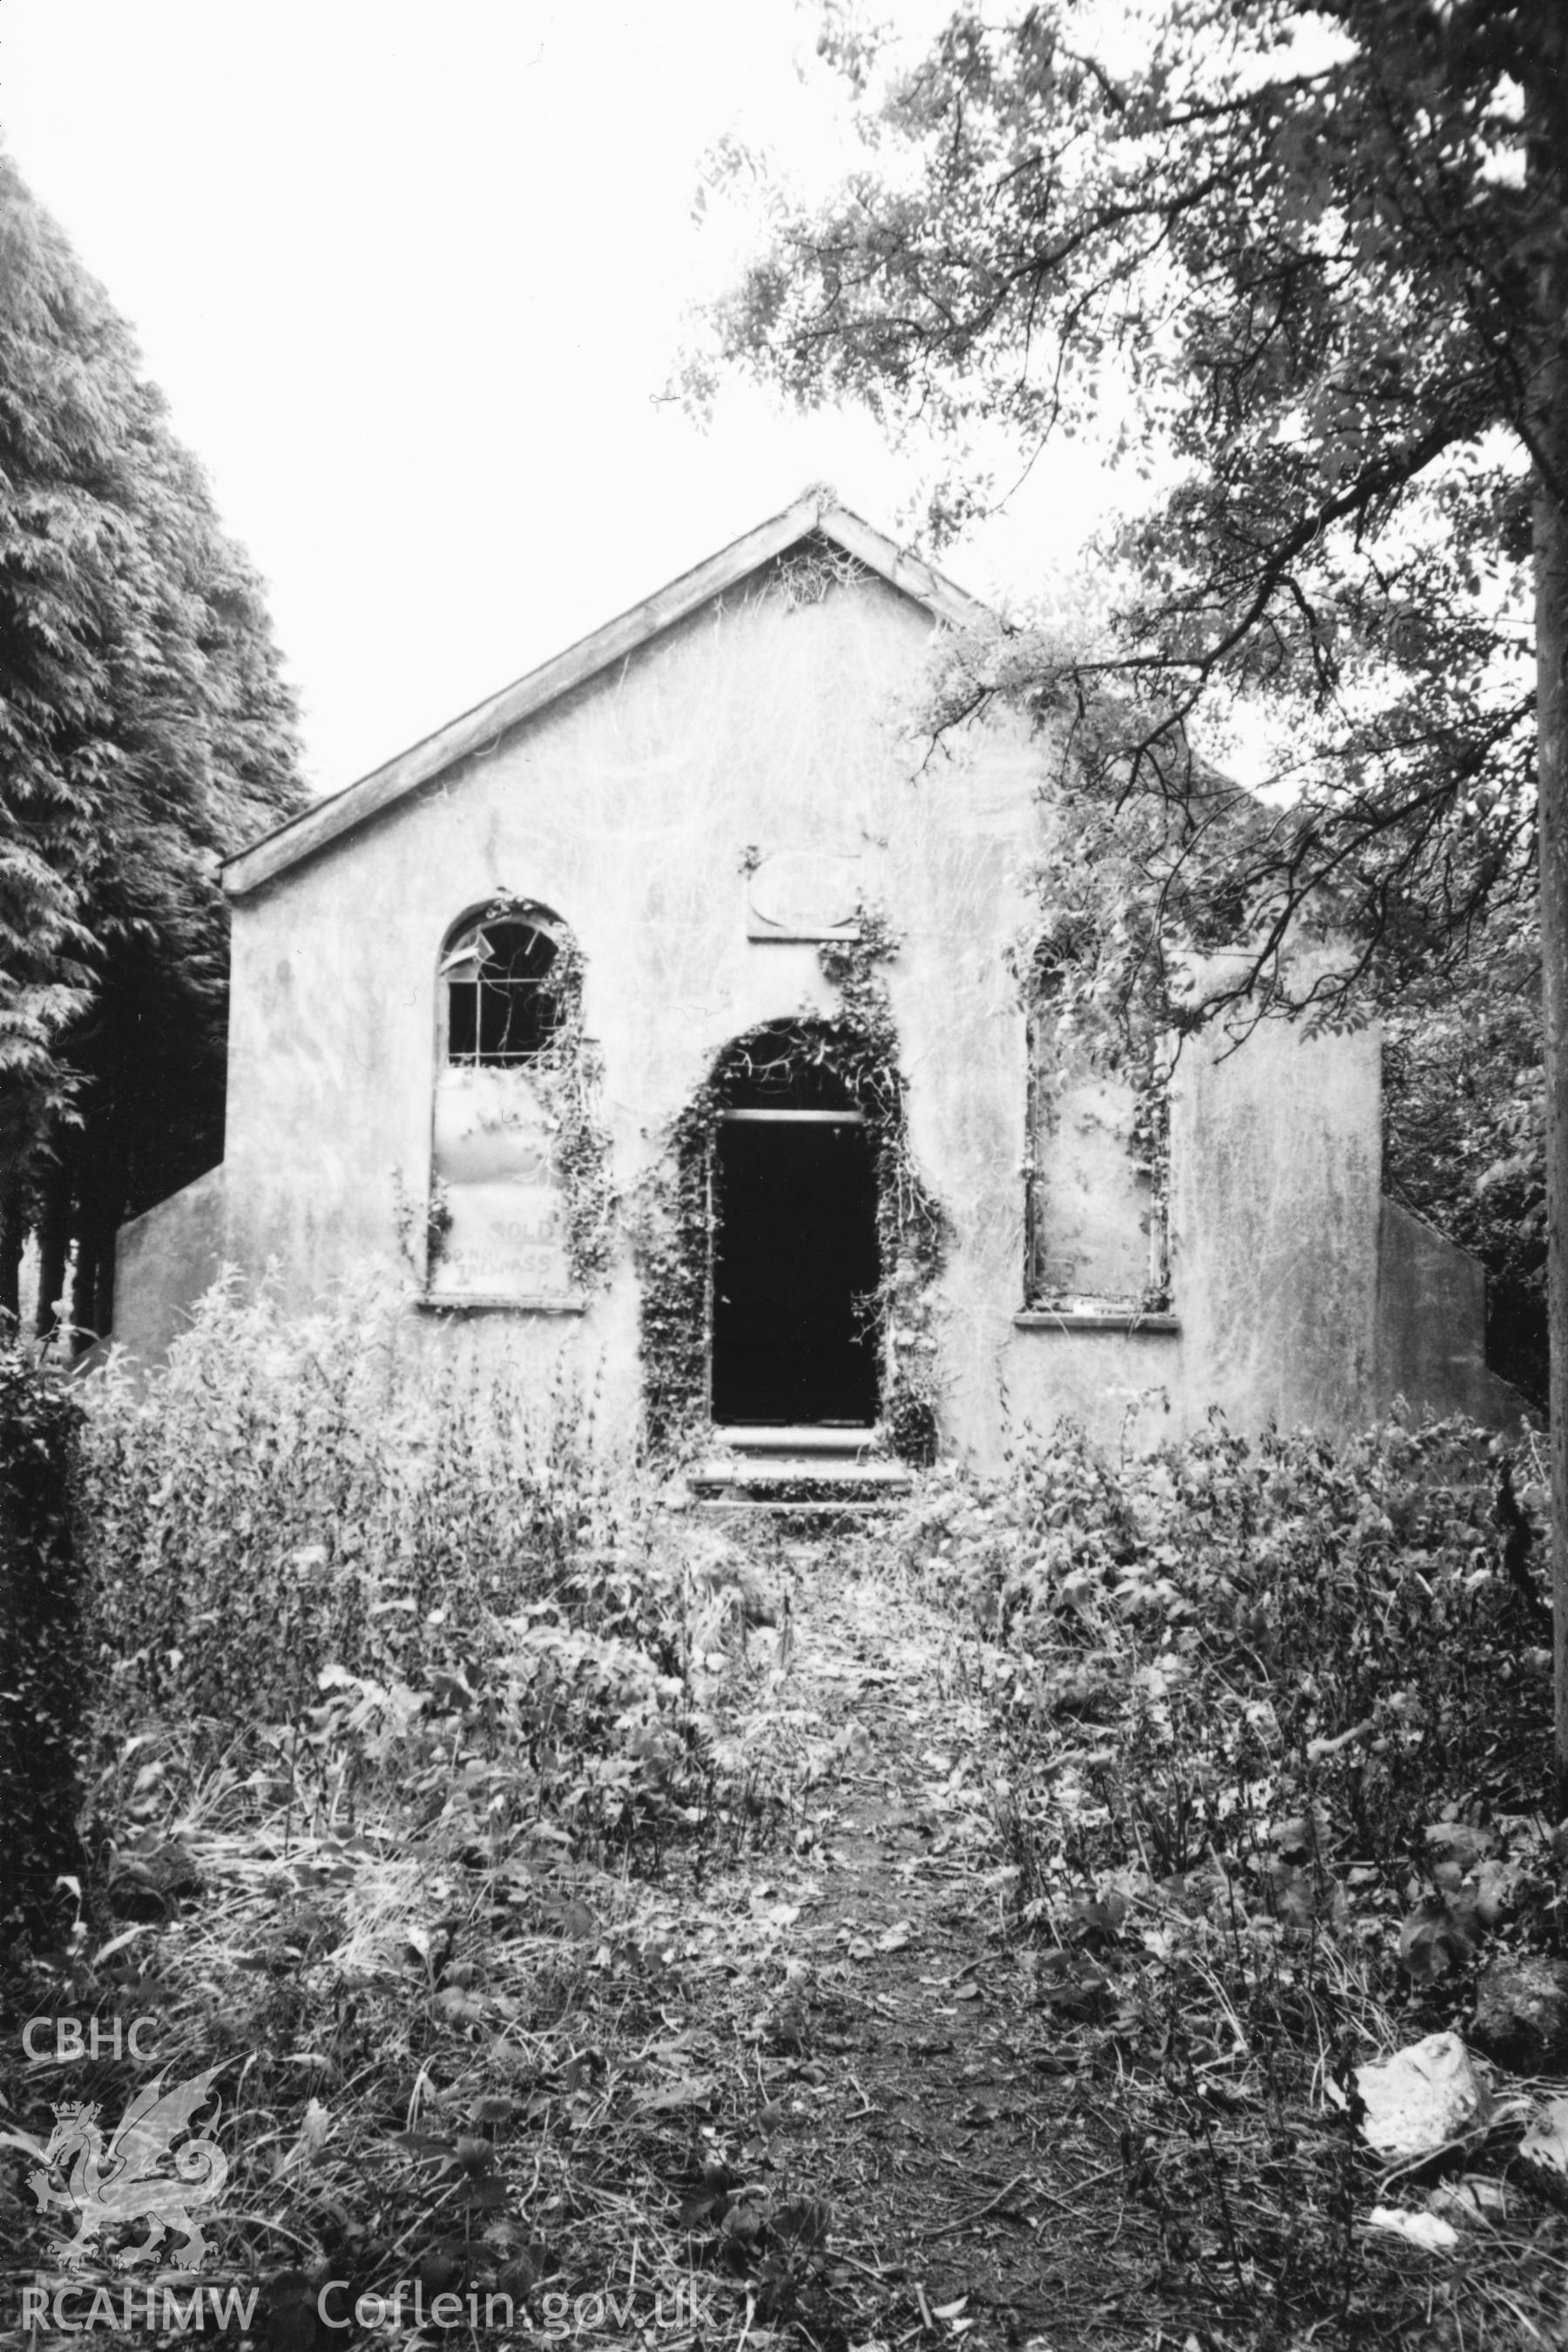 Digital copy of a black and white photograph showing an exterior view of Rhos-Goch Calvinistic Methodist Chapel, Red Roses taken by Robert Scourfield, 1996.